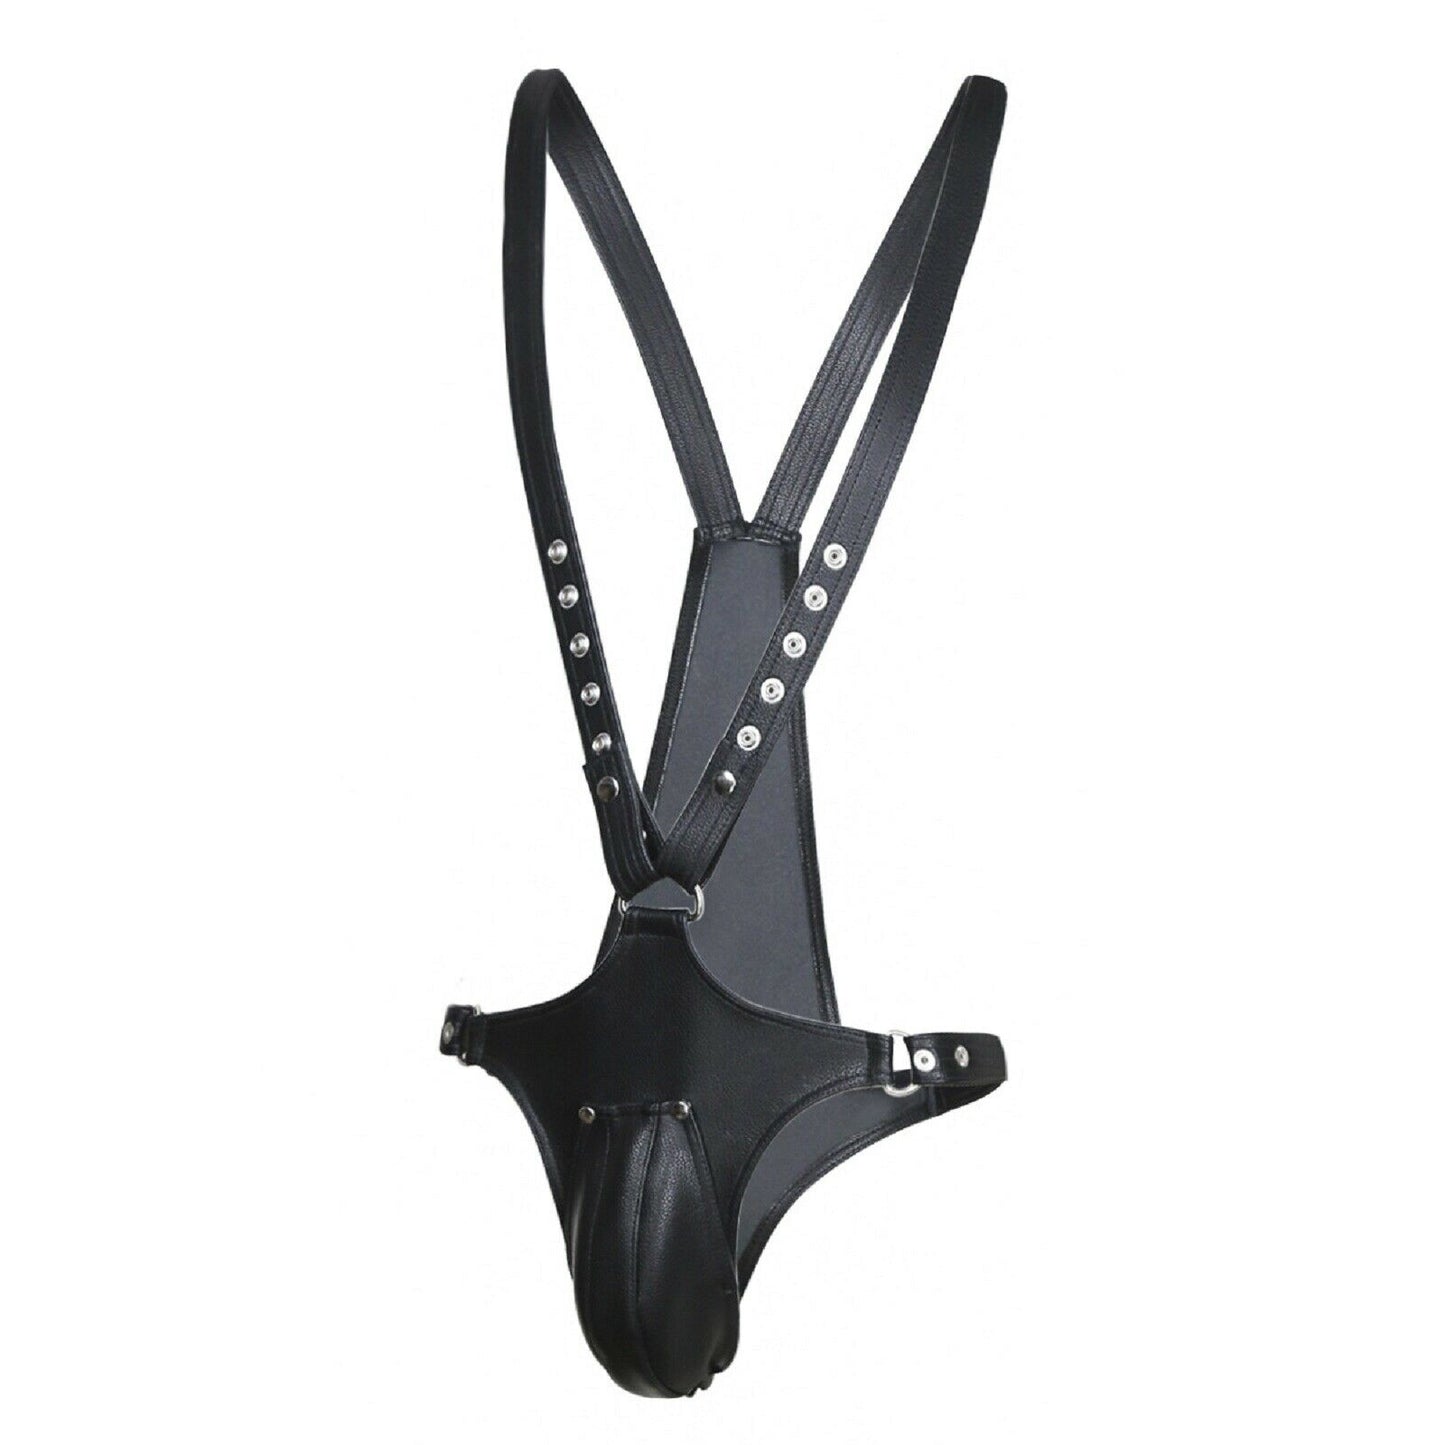 Male Chastity Belt Mankini Cock Cage Bondage BDSM PU Leather Harness Gay Sex Toy